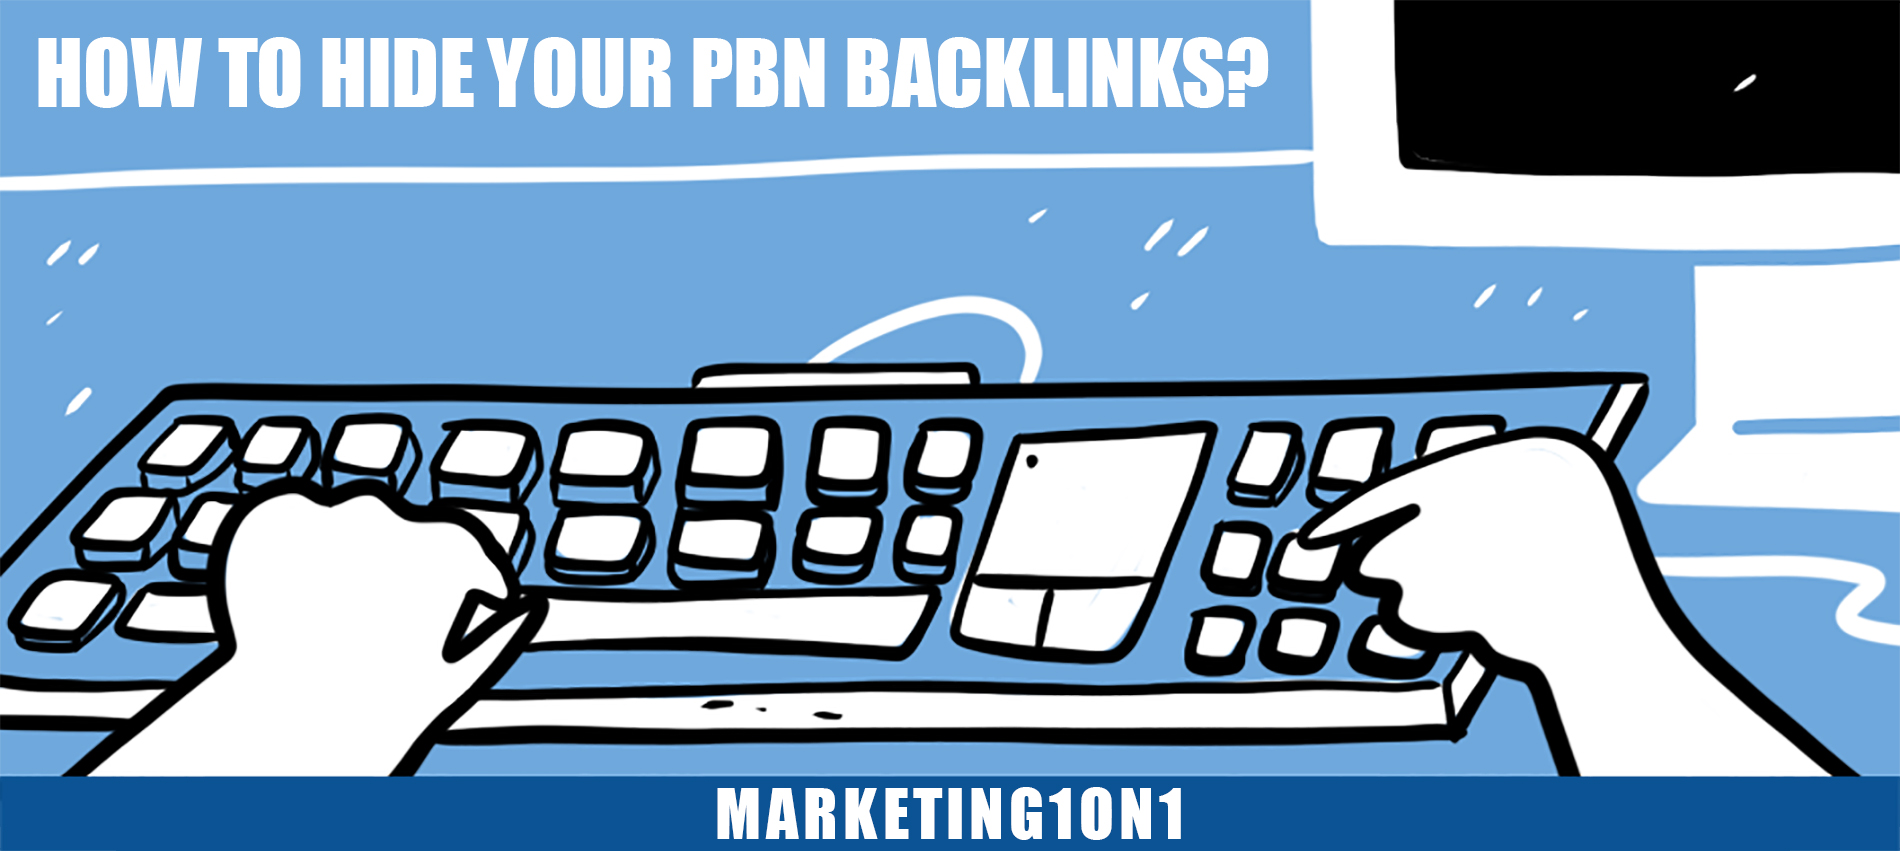 How to hide your PBN backlinks?